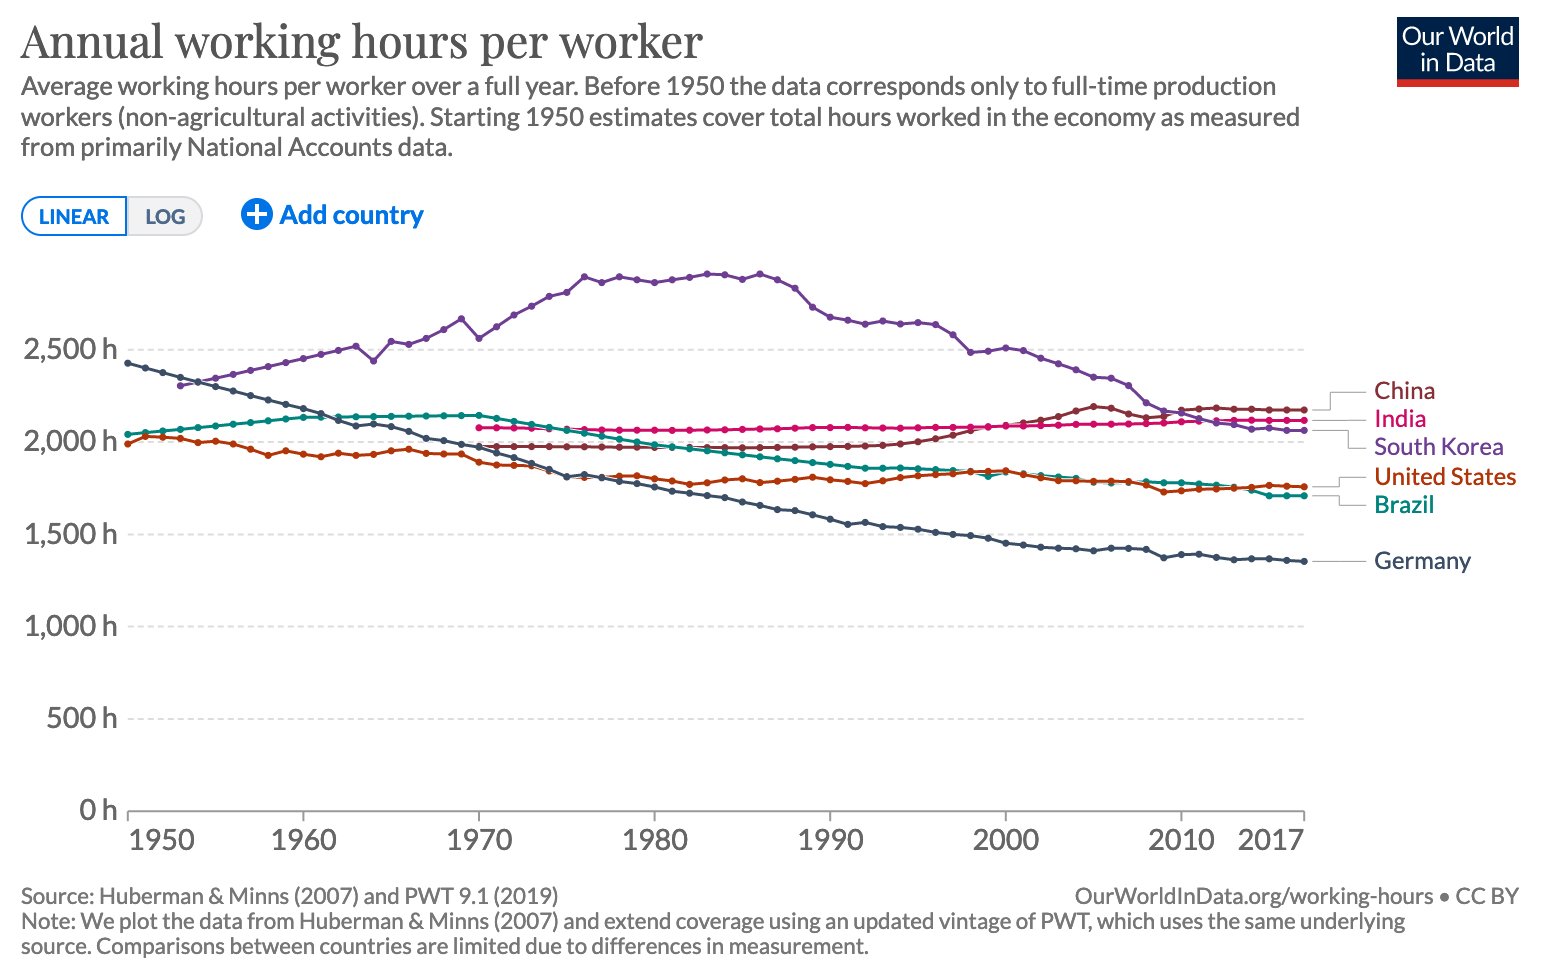 We have better technology, but we're working the same amount as before. 